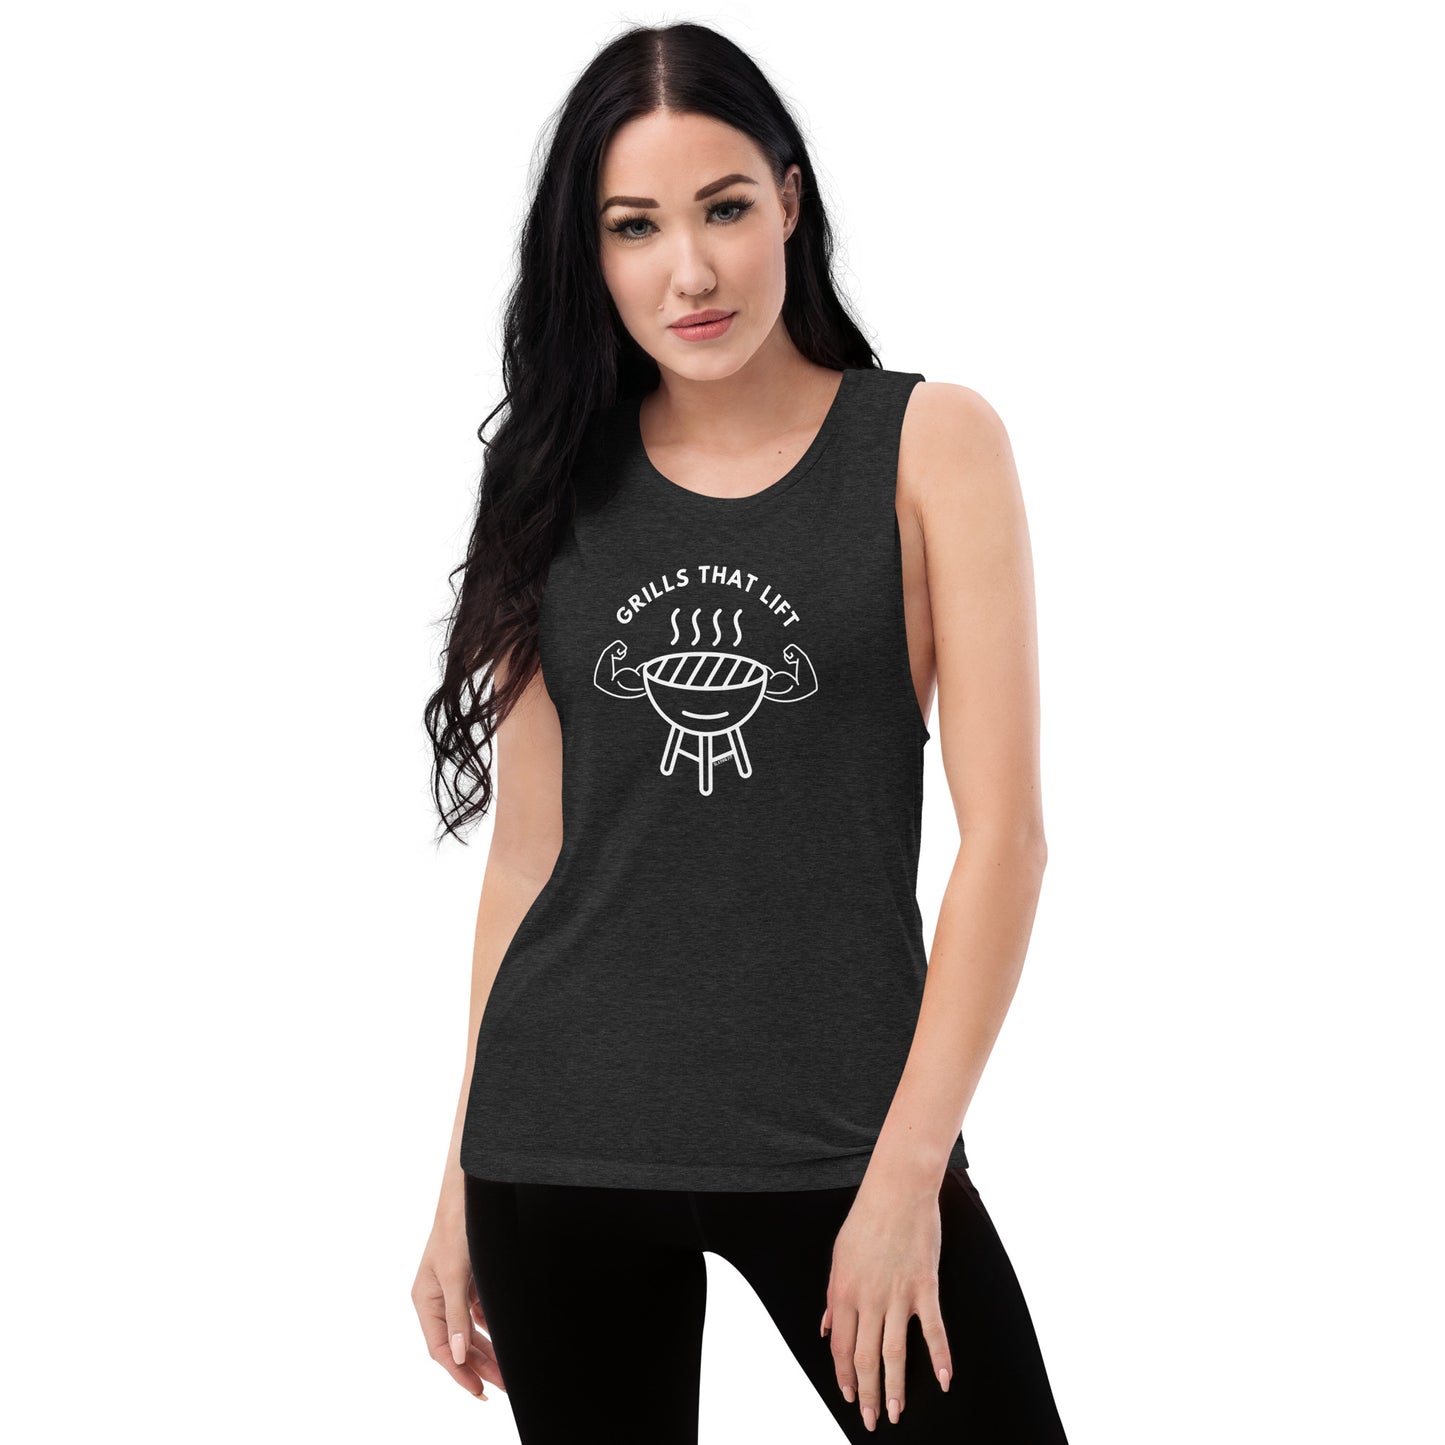 Grills that Lift Ladies’ Muscle Tank